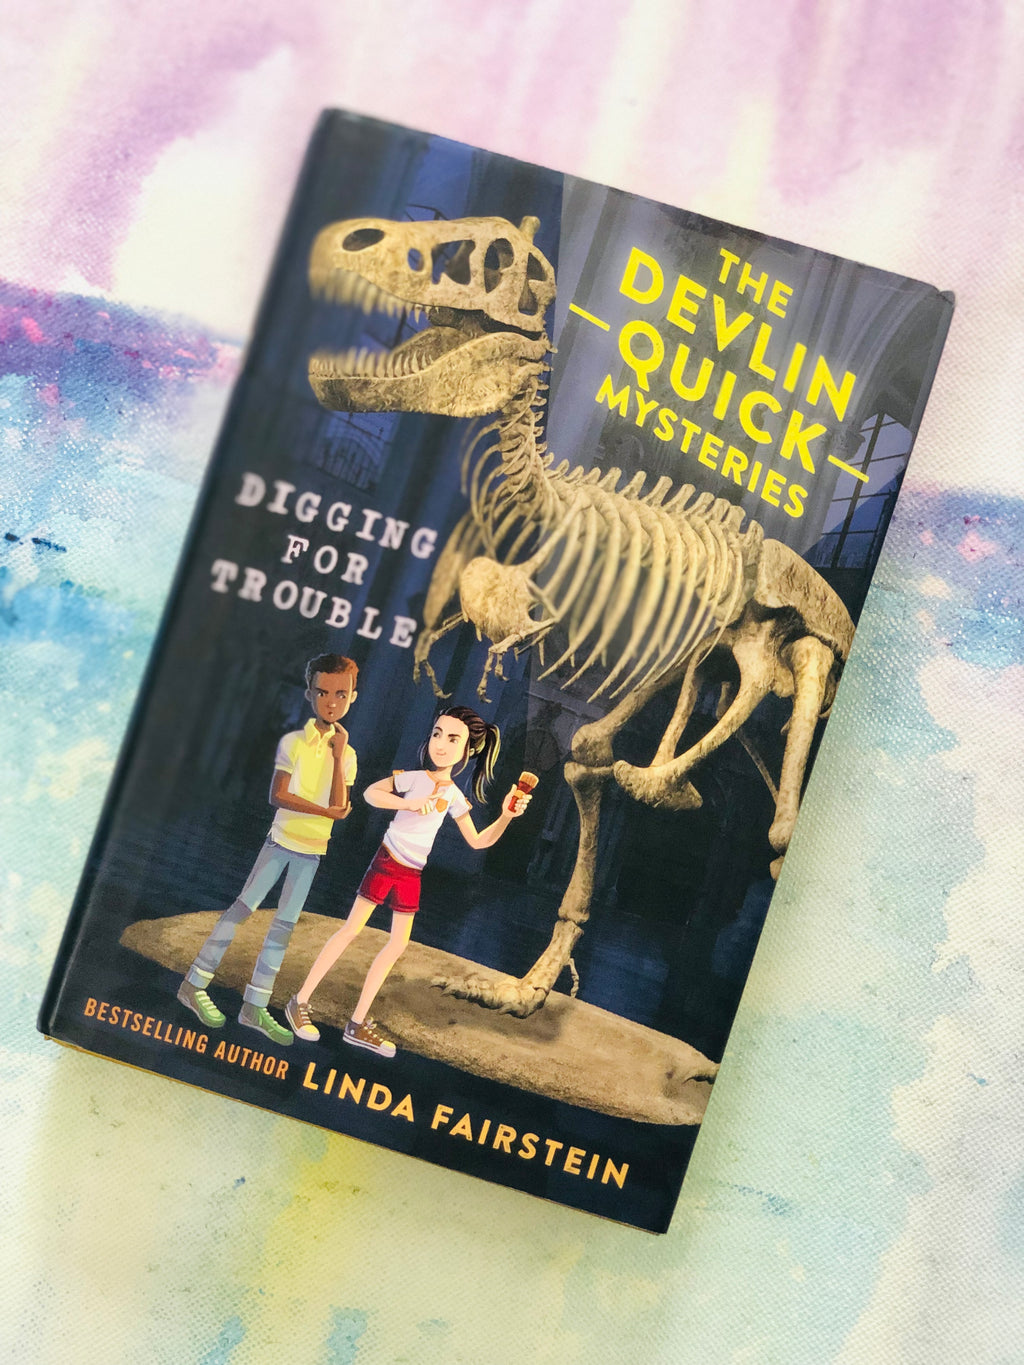 The Devlin Quick Mysteries, Digging For Trouble by Linda Fairstein